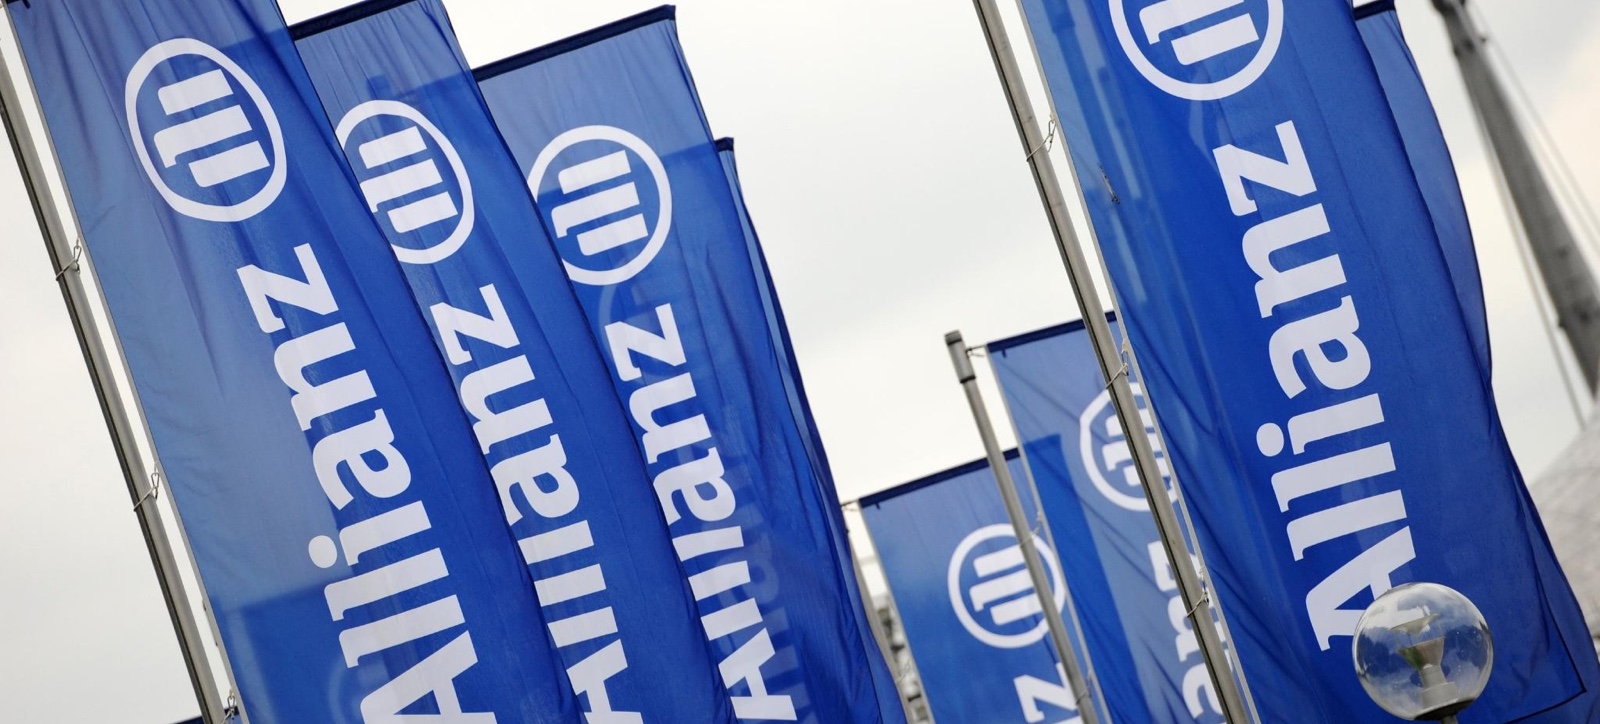 Allianz is once again recognized as the world's # 1 insurance brand by Interbrand Best Global Brand Rankings